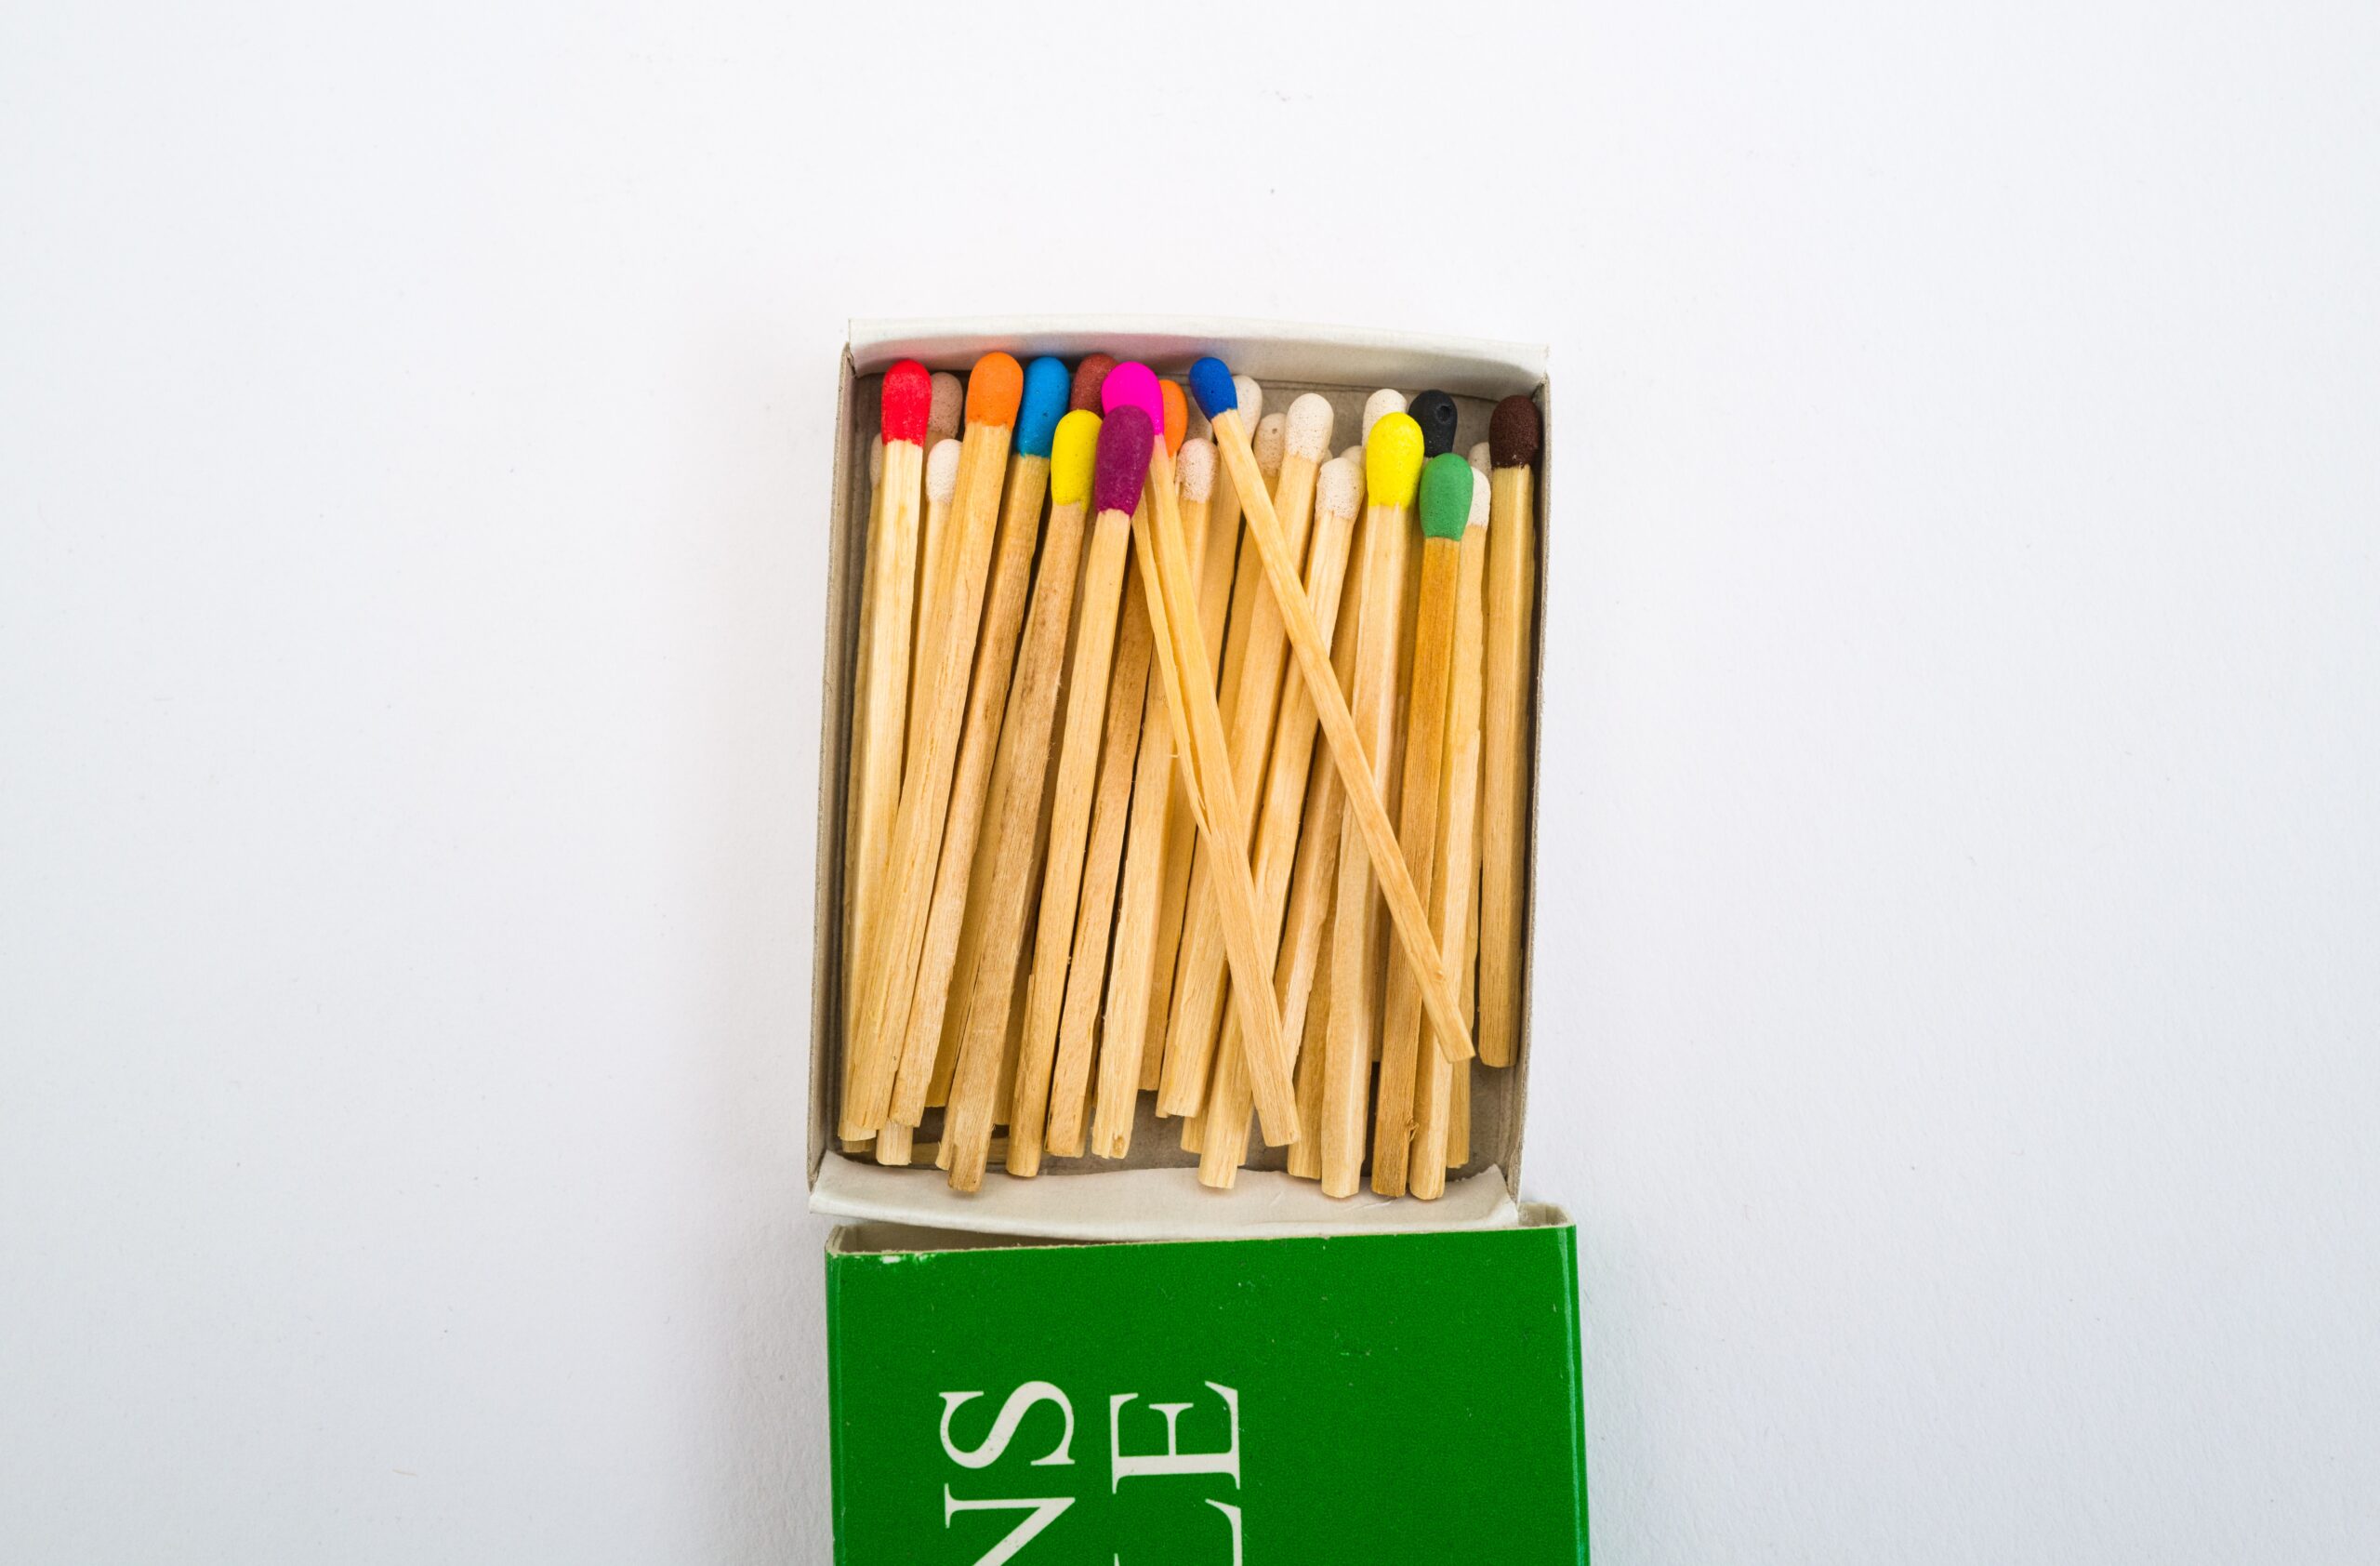 matchbox with different colored tips